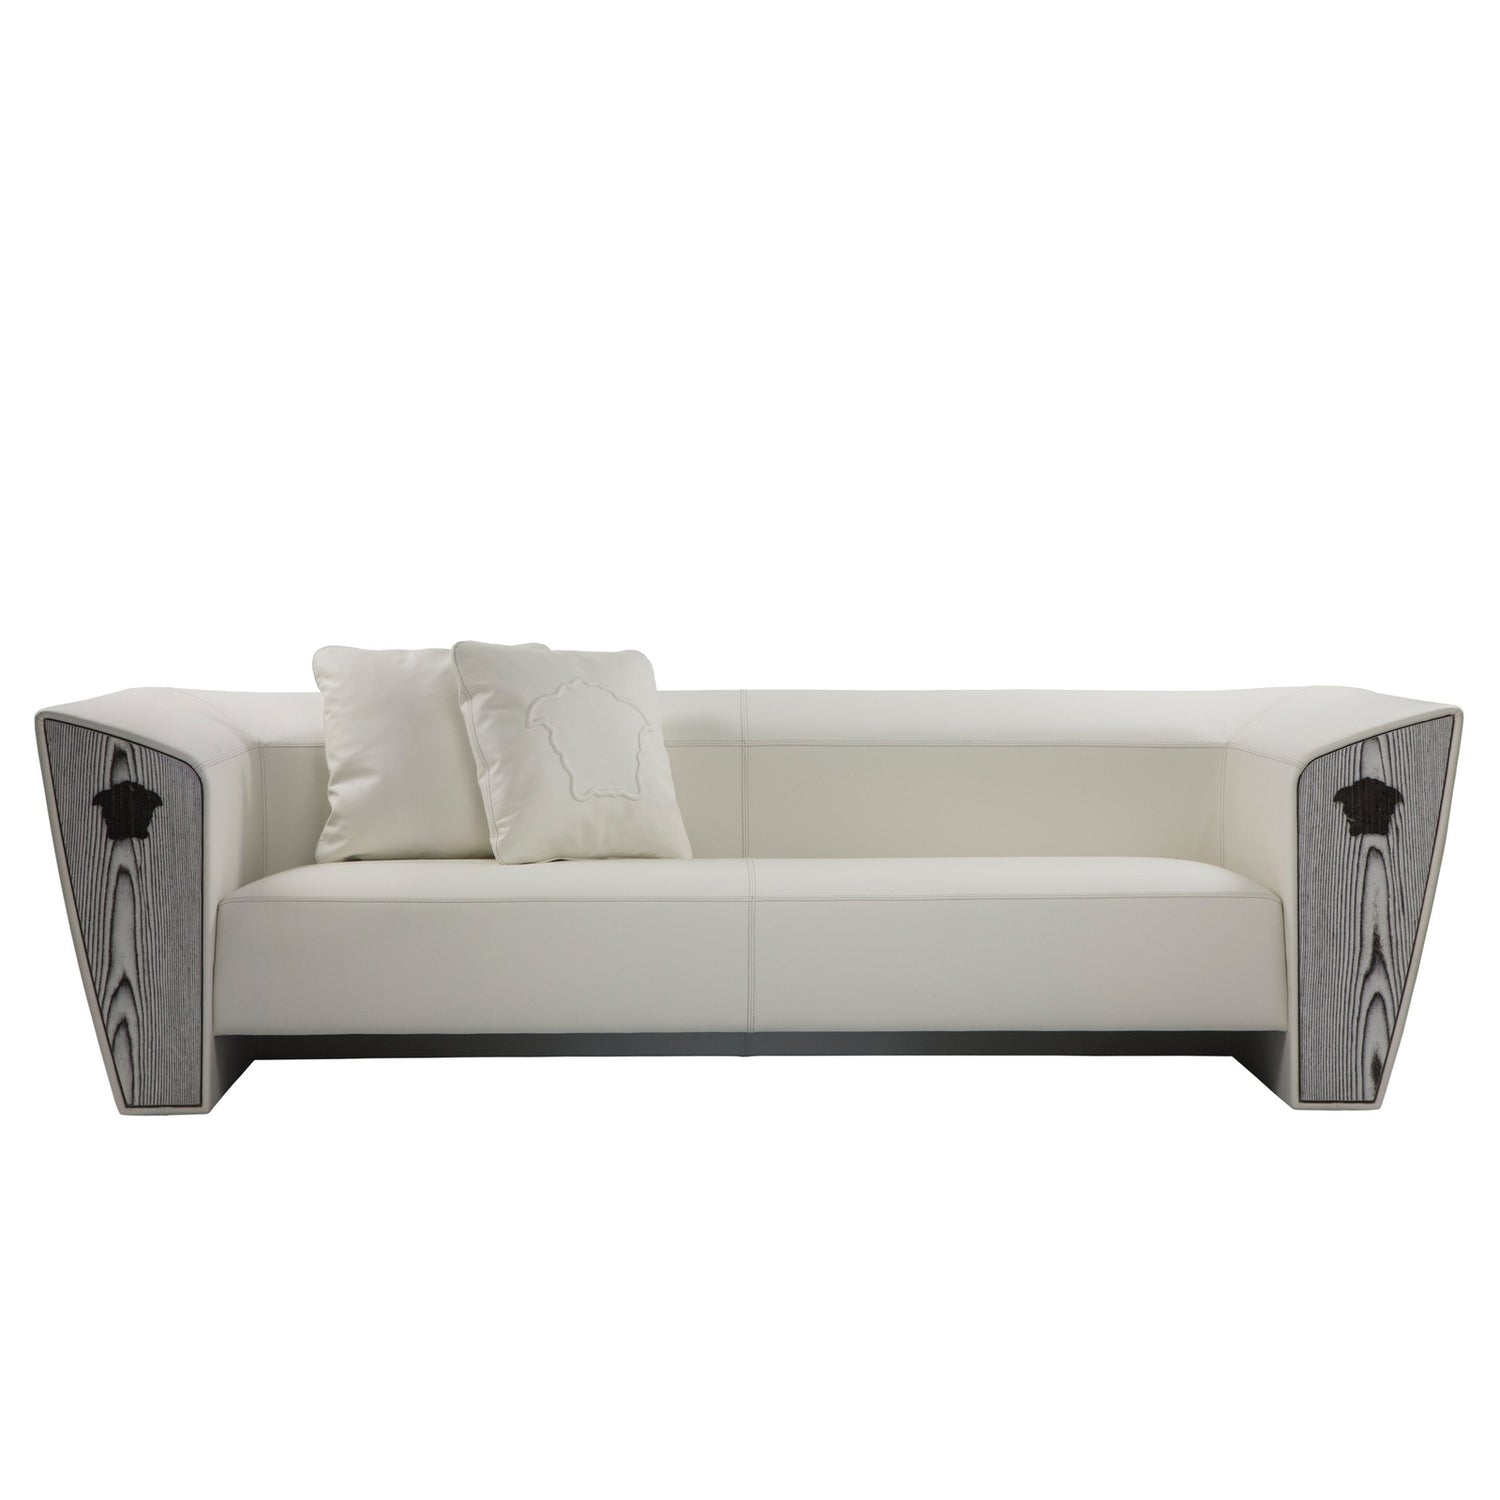 Sold at Auction: Versace Style Orleans Two Seater Sofa